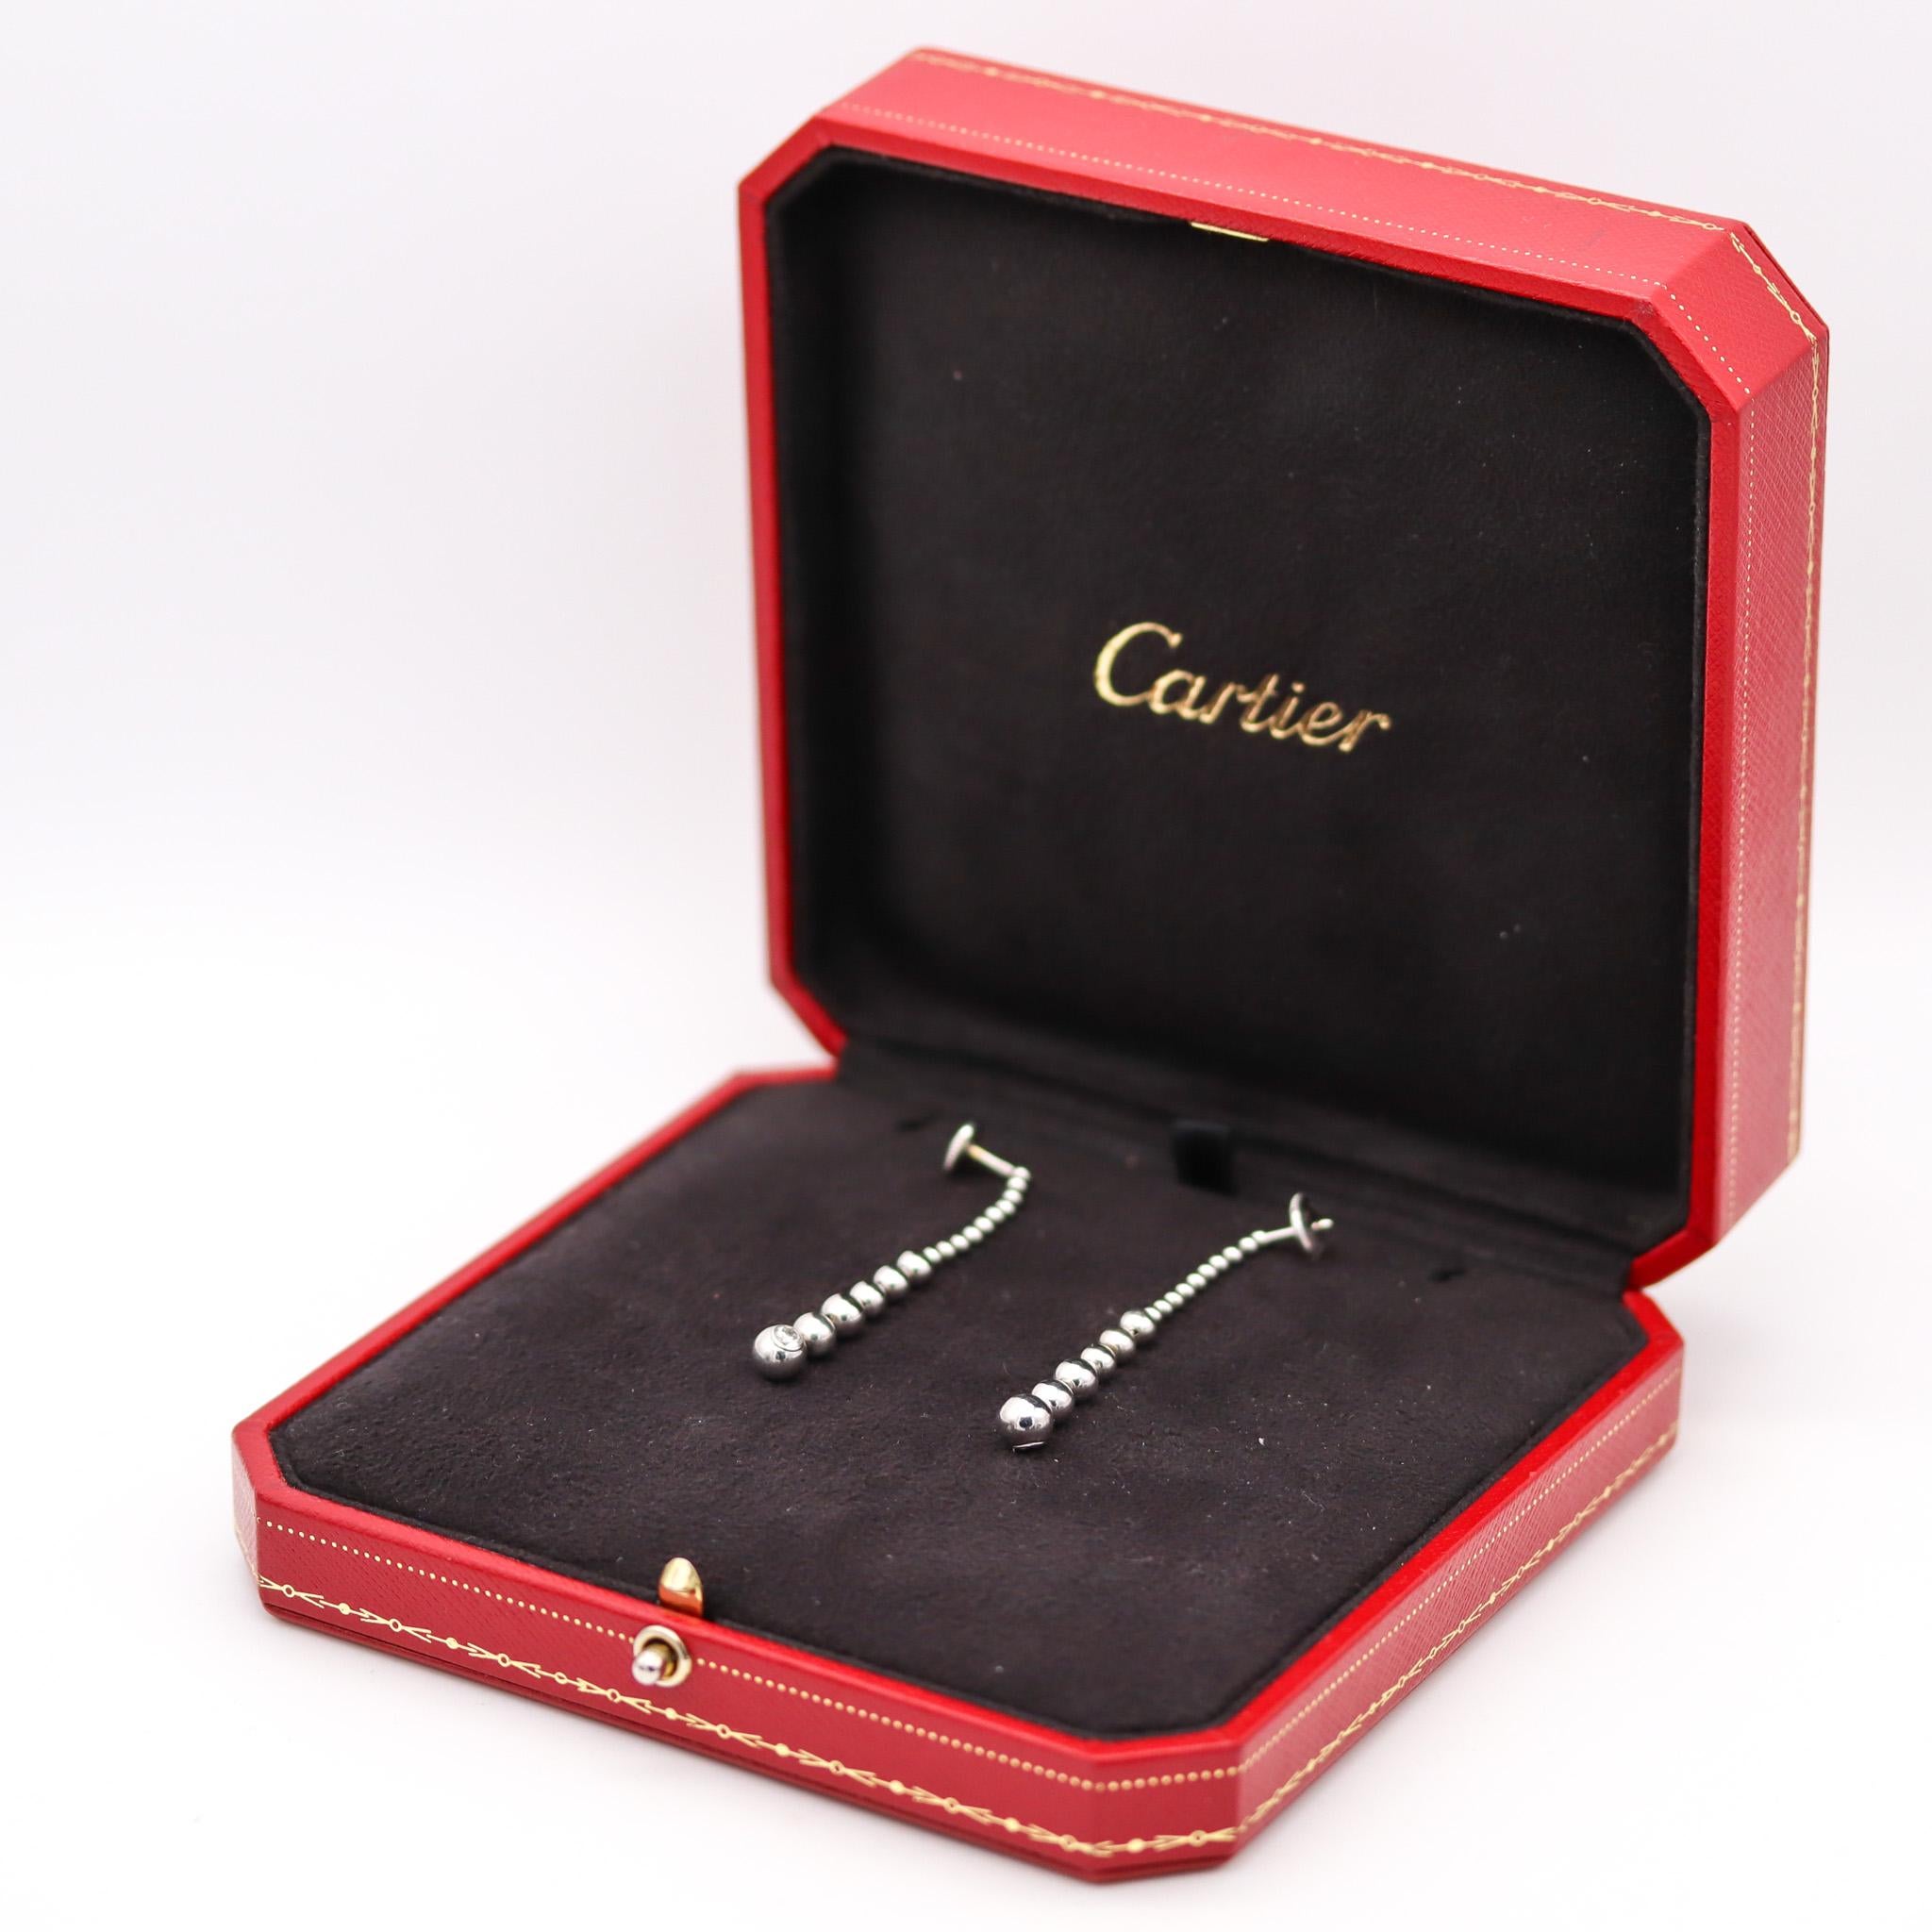 Perles de diamants dangle drop earrings designed by Cartier.

Beautiful contemporary dangle drop earrings, created in Paris France by the jewelry house of Cartier, back in the 1999. They are from the Perles De Diamants collection and were crafted